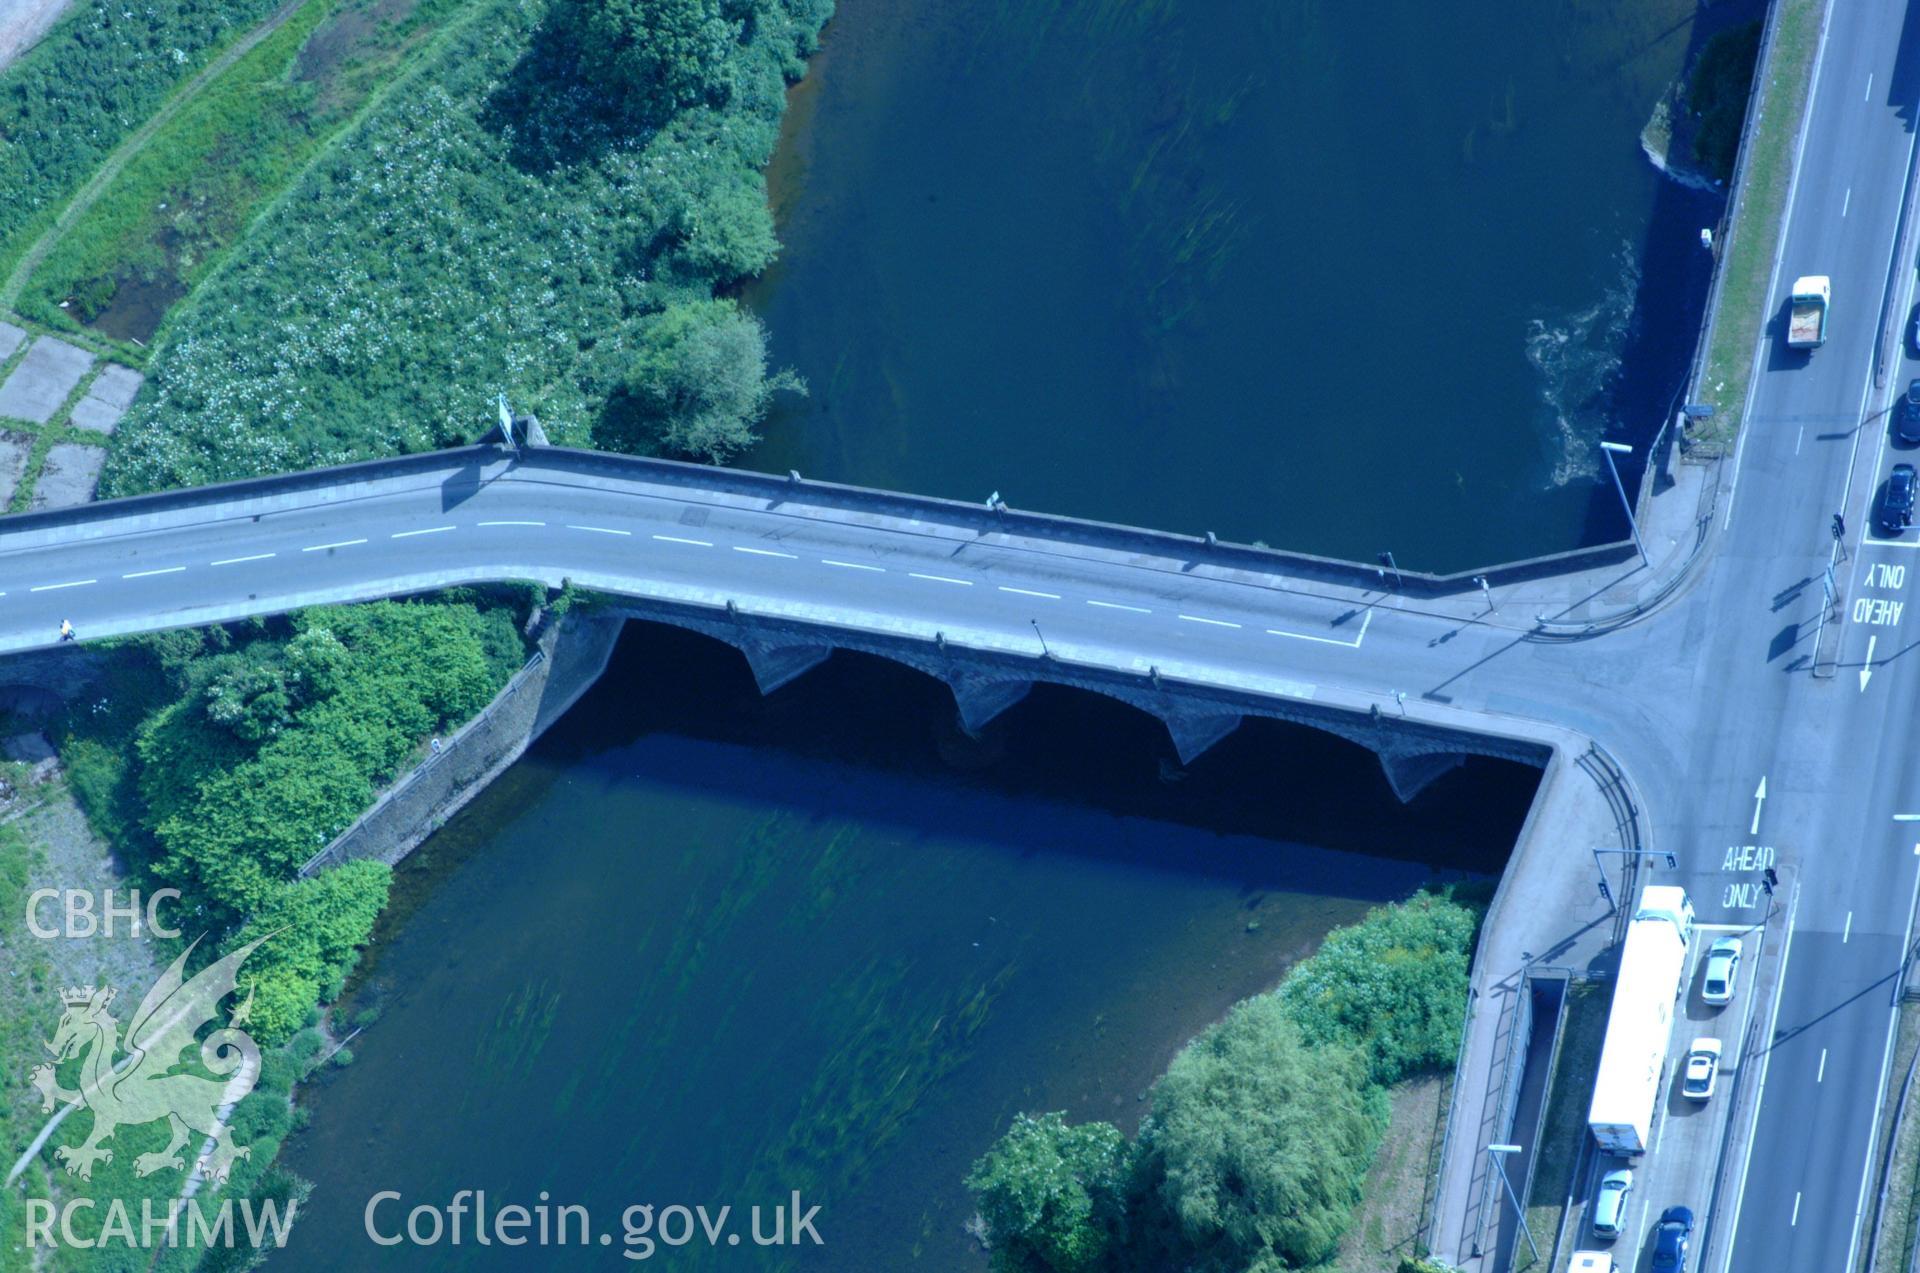 RCAHMW colour oblique aerial photograph of the Wye Bridge, Monmouth taken on 02/06/2004 by Toby Driver